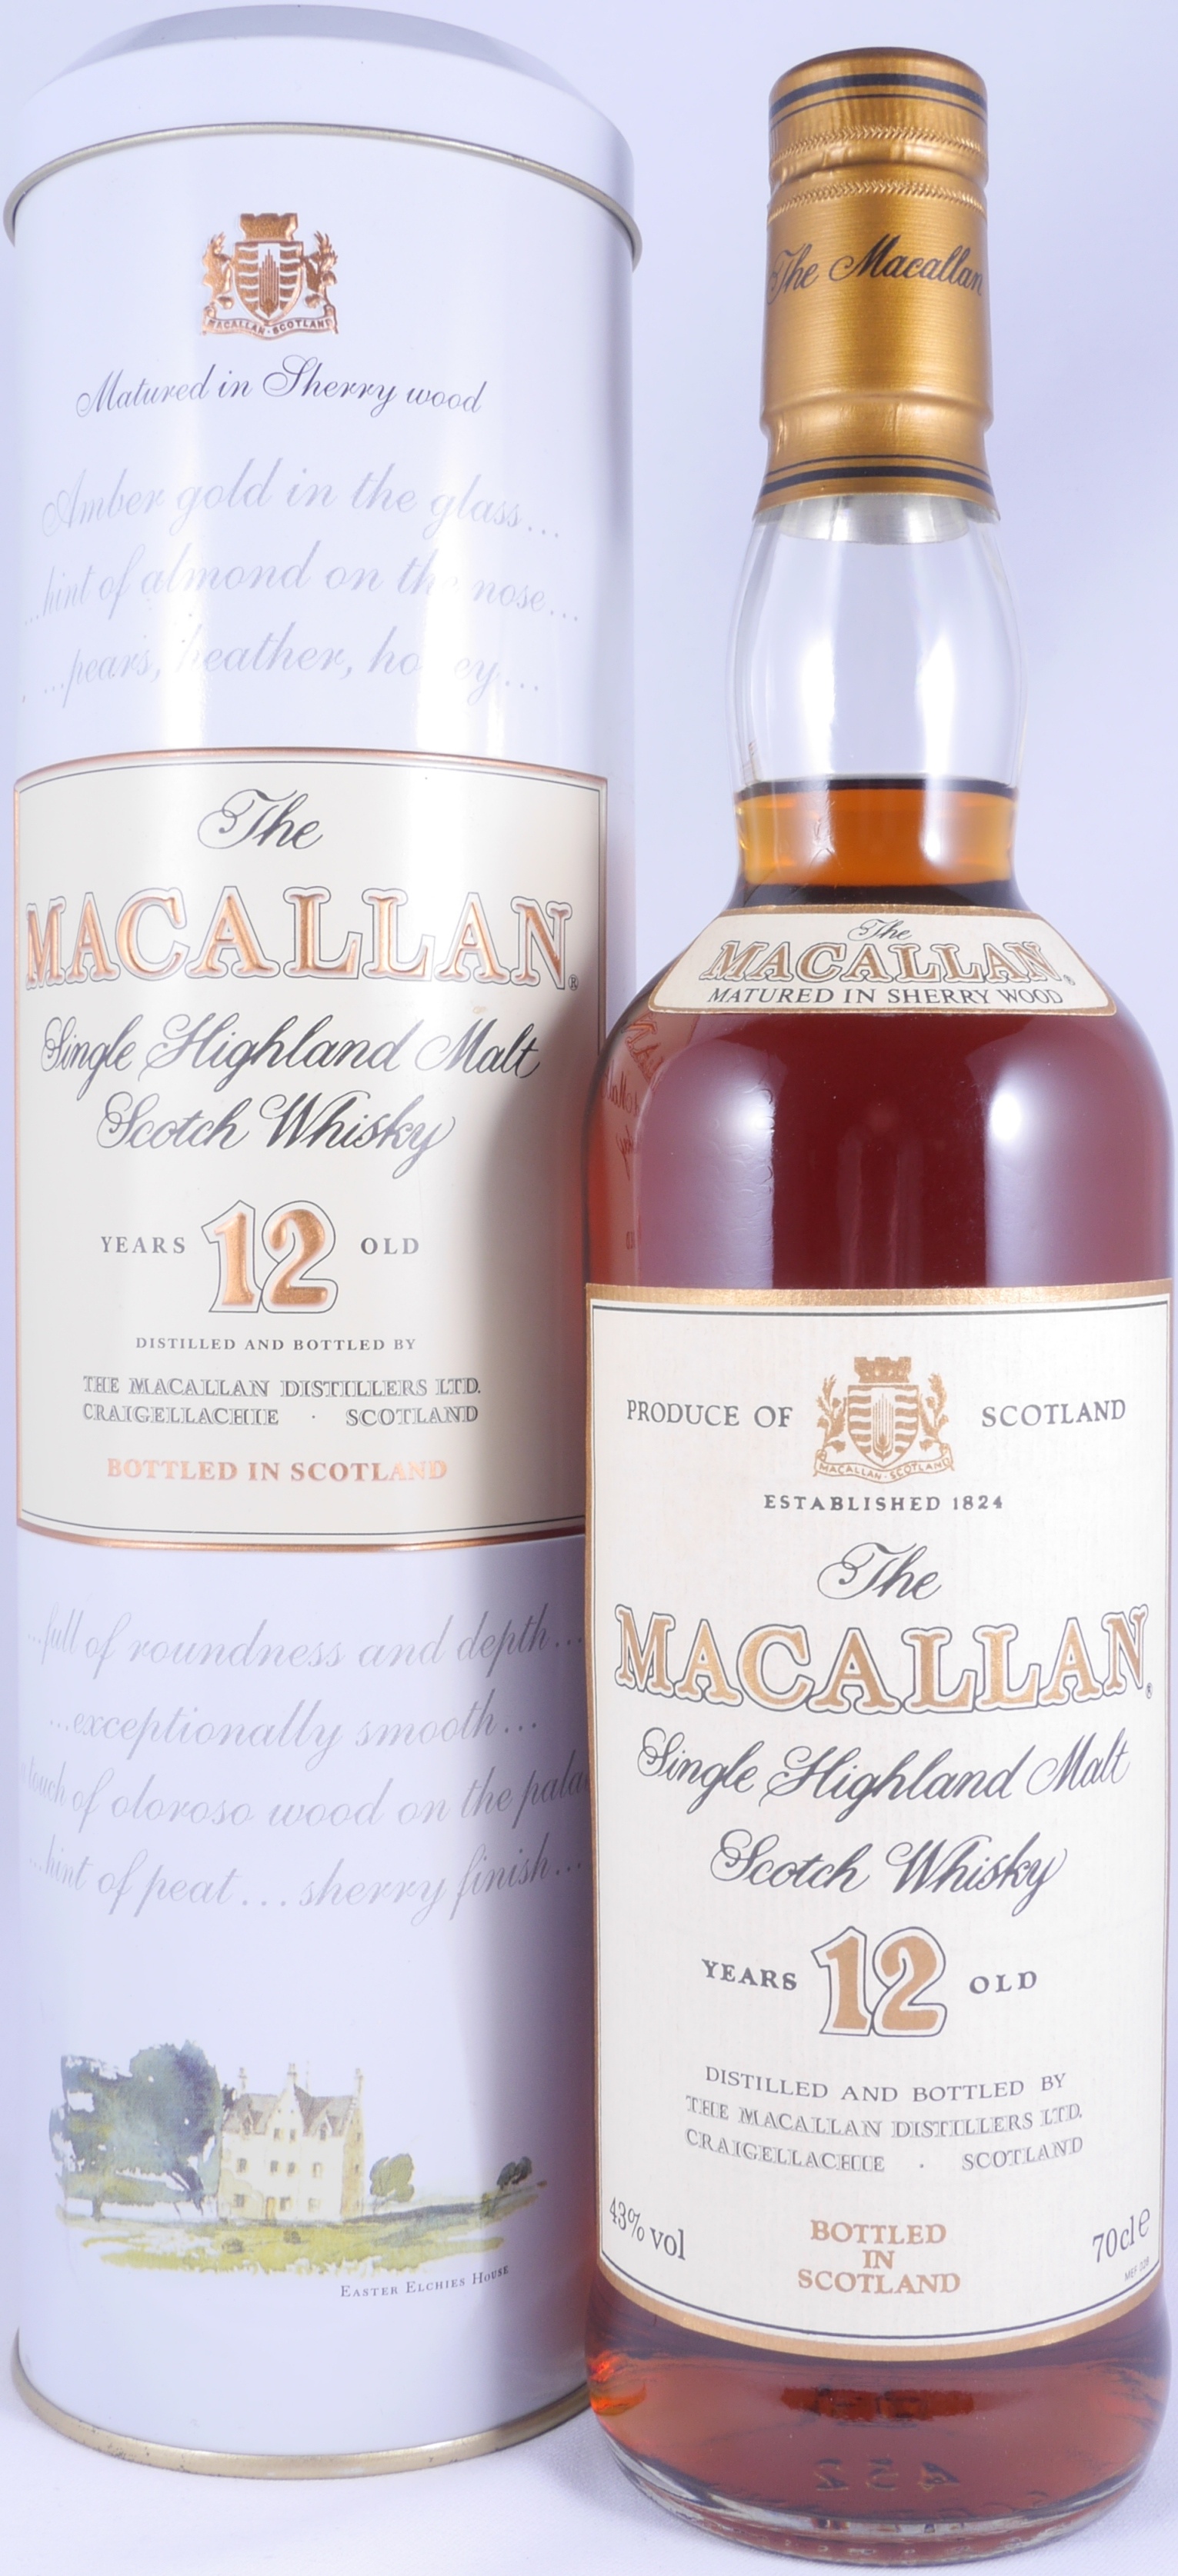 Buy Macallan 12 Years Sherry Wood Highland Single Malt Scotch Whisky Round Tin 43 0 Abv Rare Original Bottle From The 80s At Amcom Secure Online